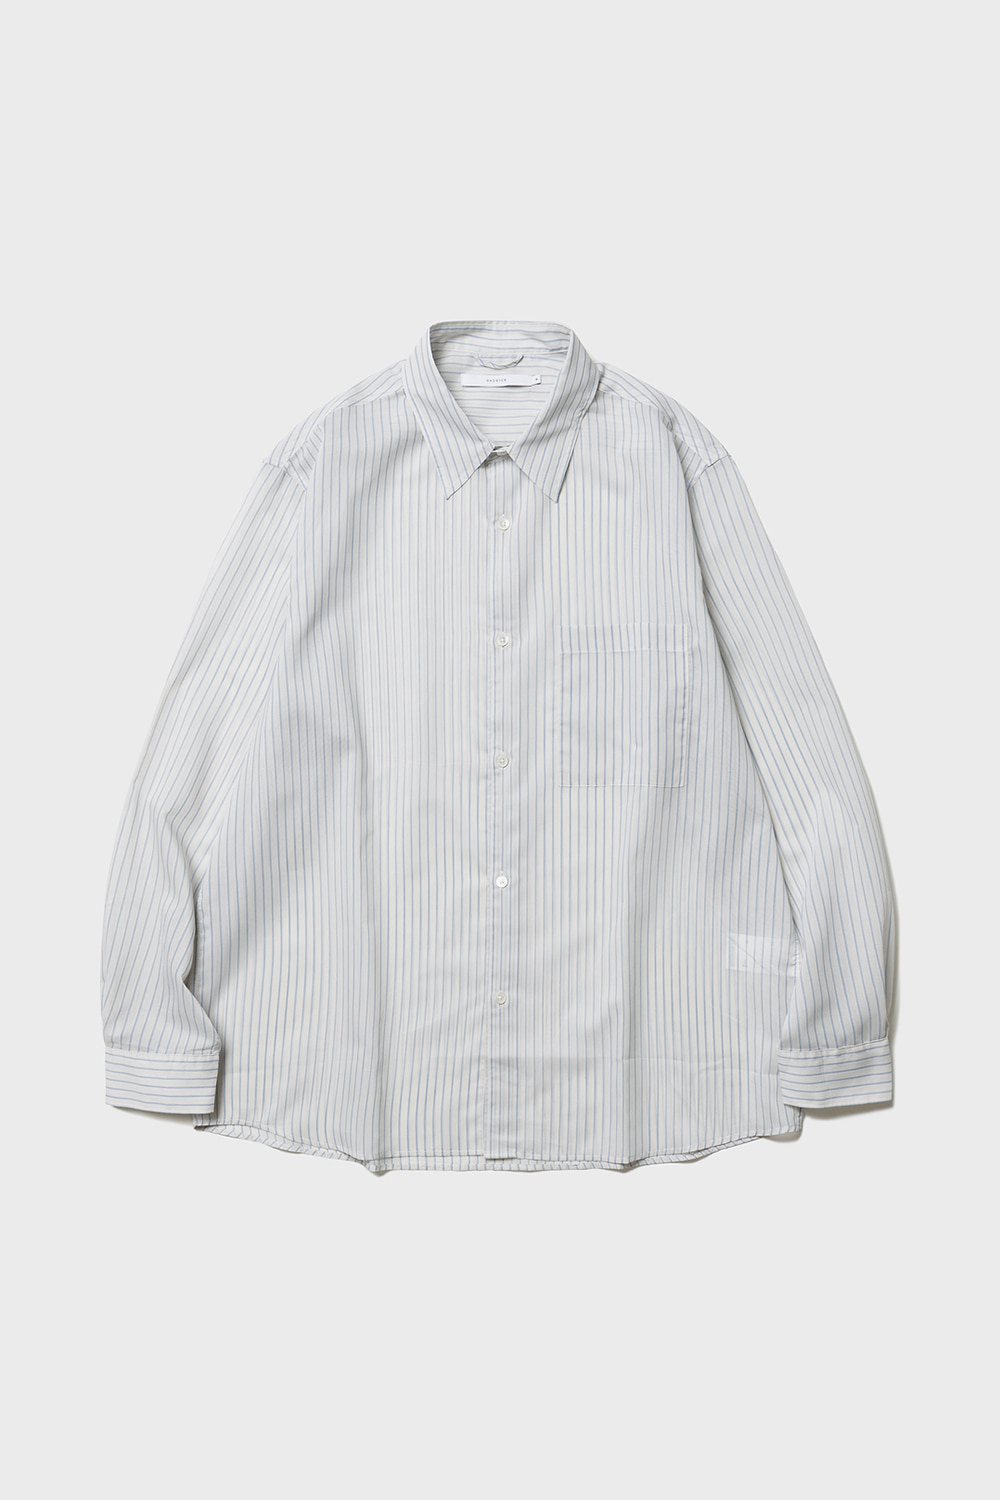 SILKY WIDE SHIRT (WHITE)